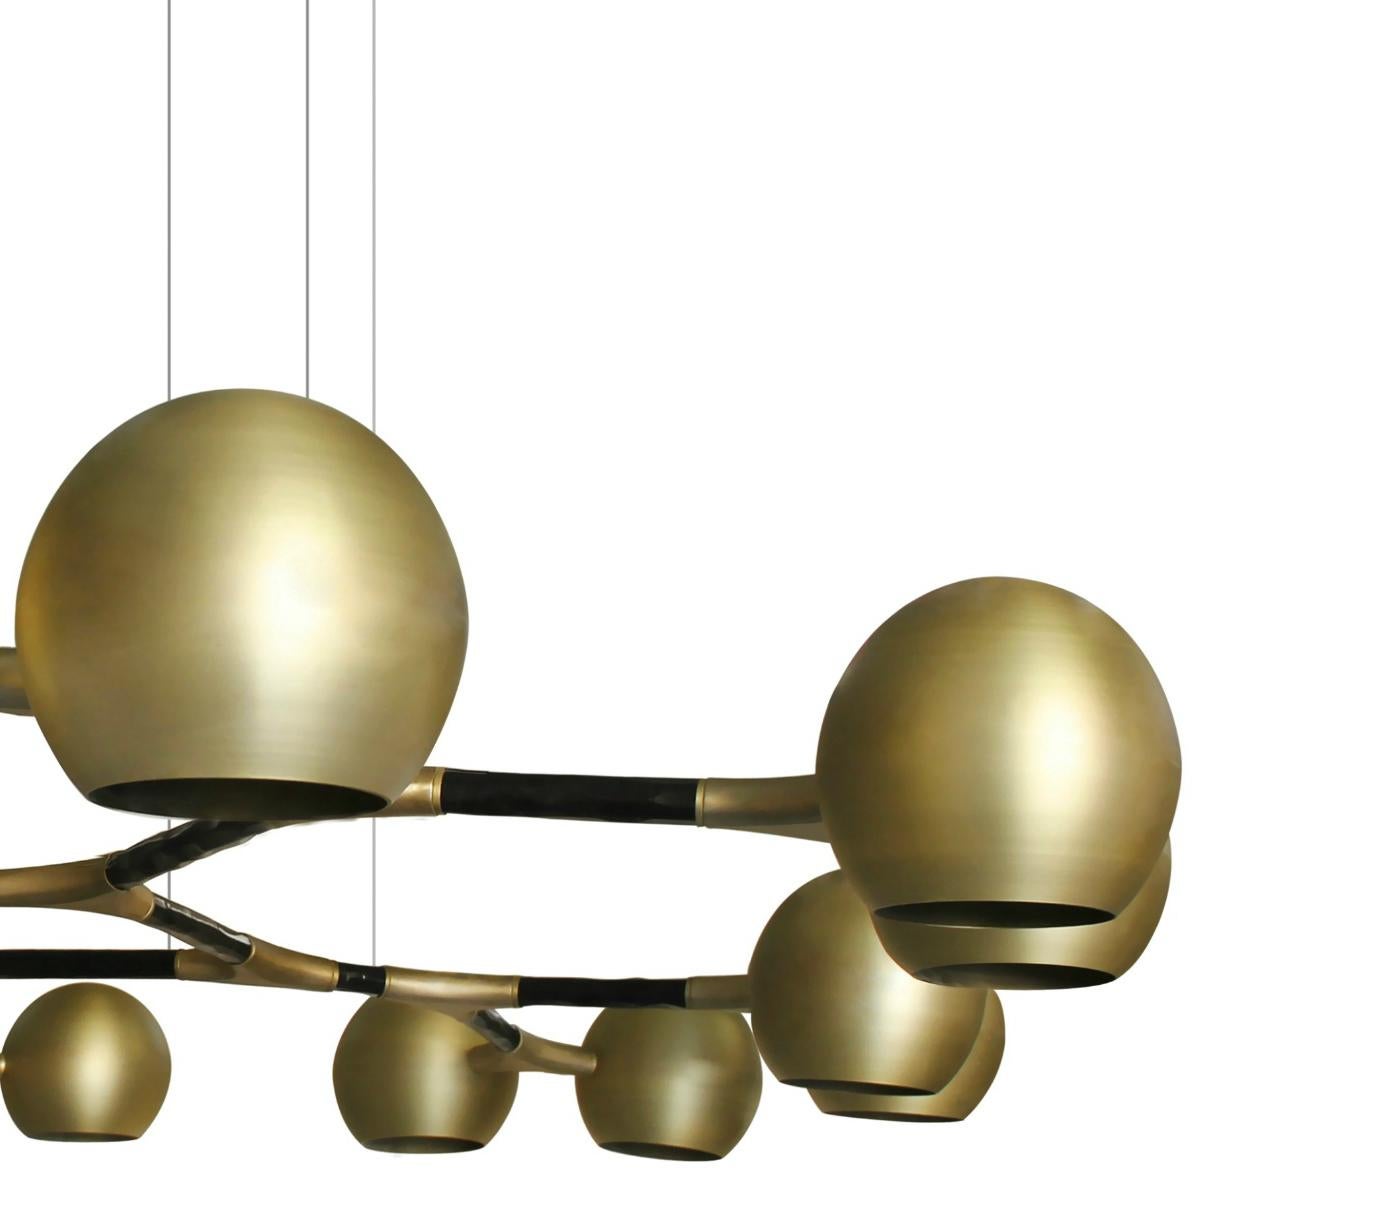 Just like the God of the sky and the rising sun, Horus Suspension Light promises to be a reference in a modern interior design. Featuring a structure in matte black lacquered brass and shades in matte brass, this chandelier is perfect for creating a